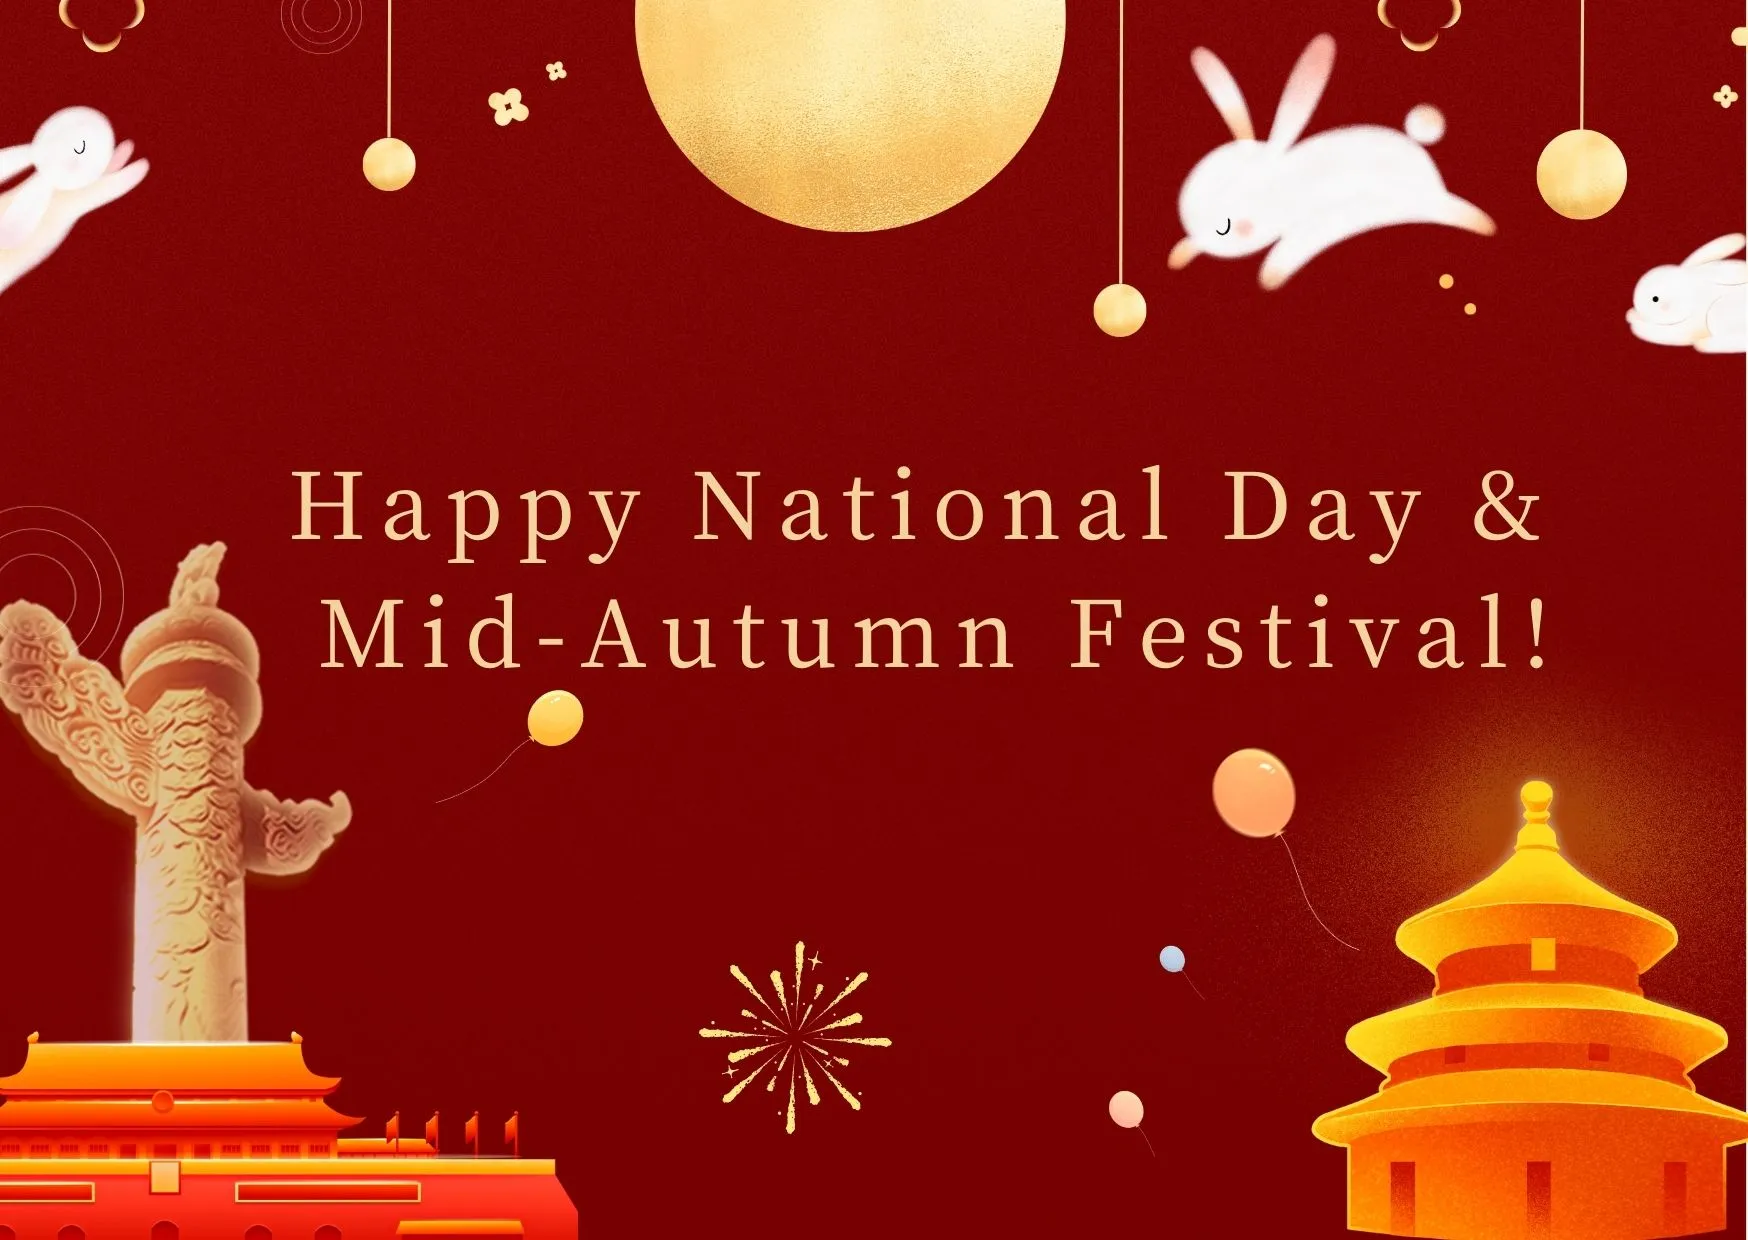 Happy National Day and Mid-Autumn Festival!